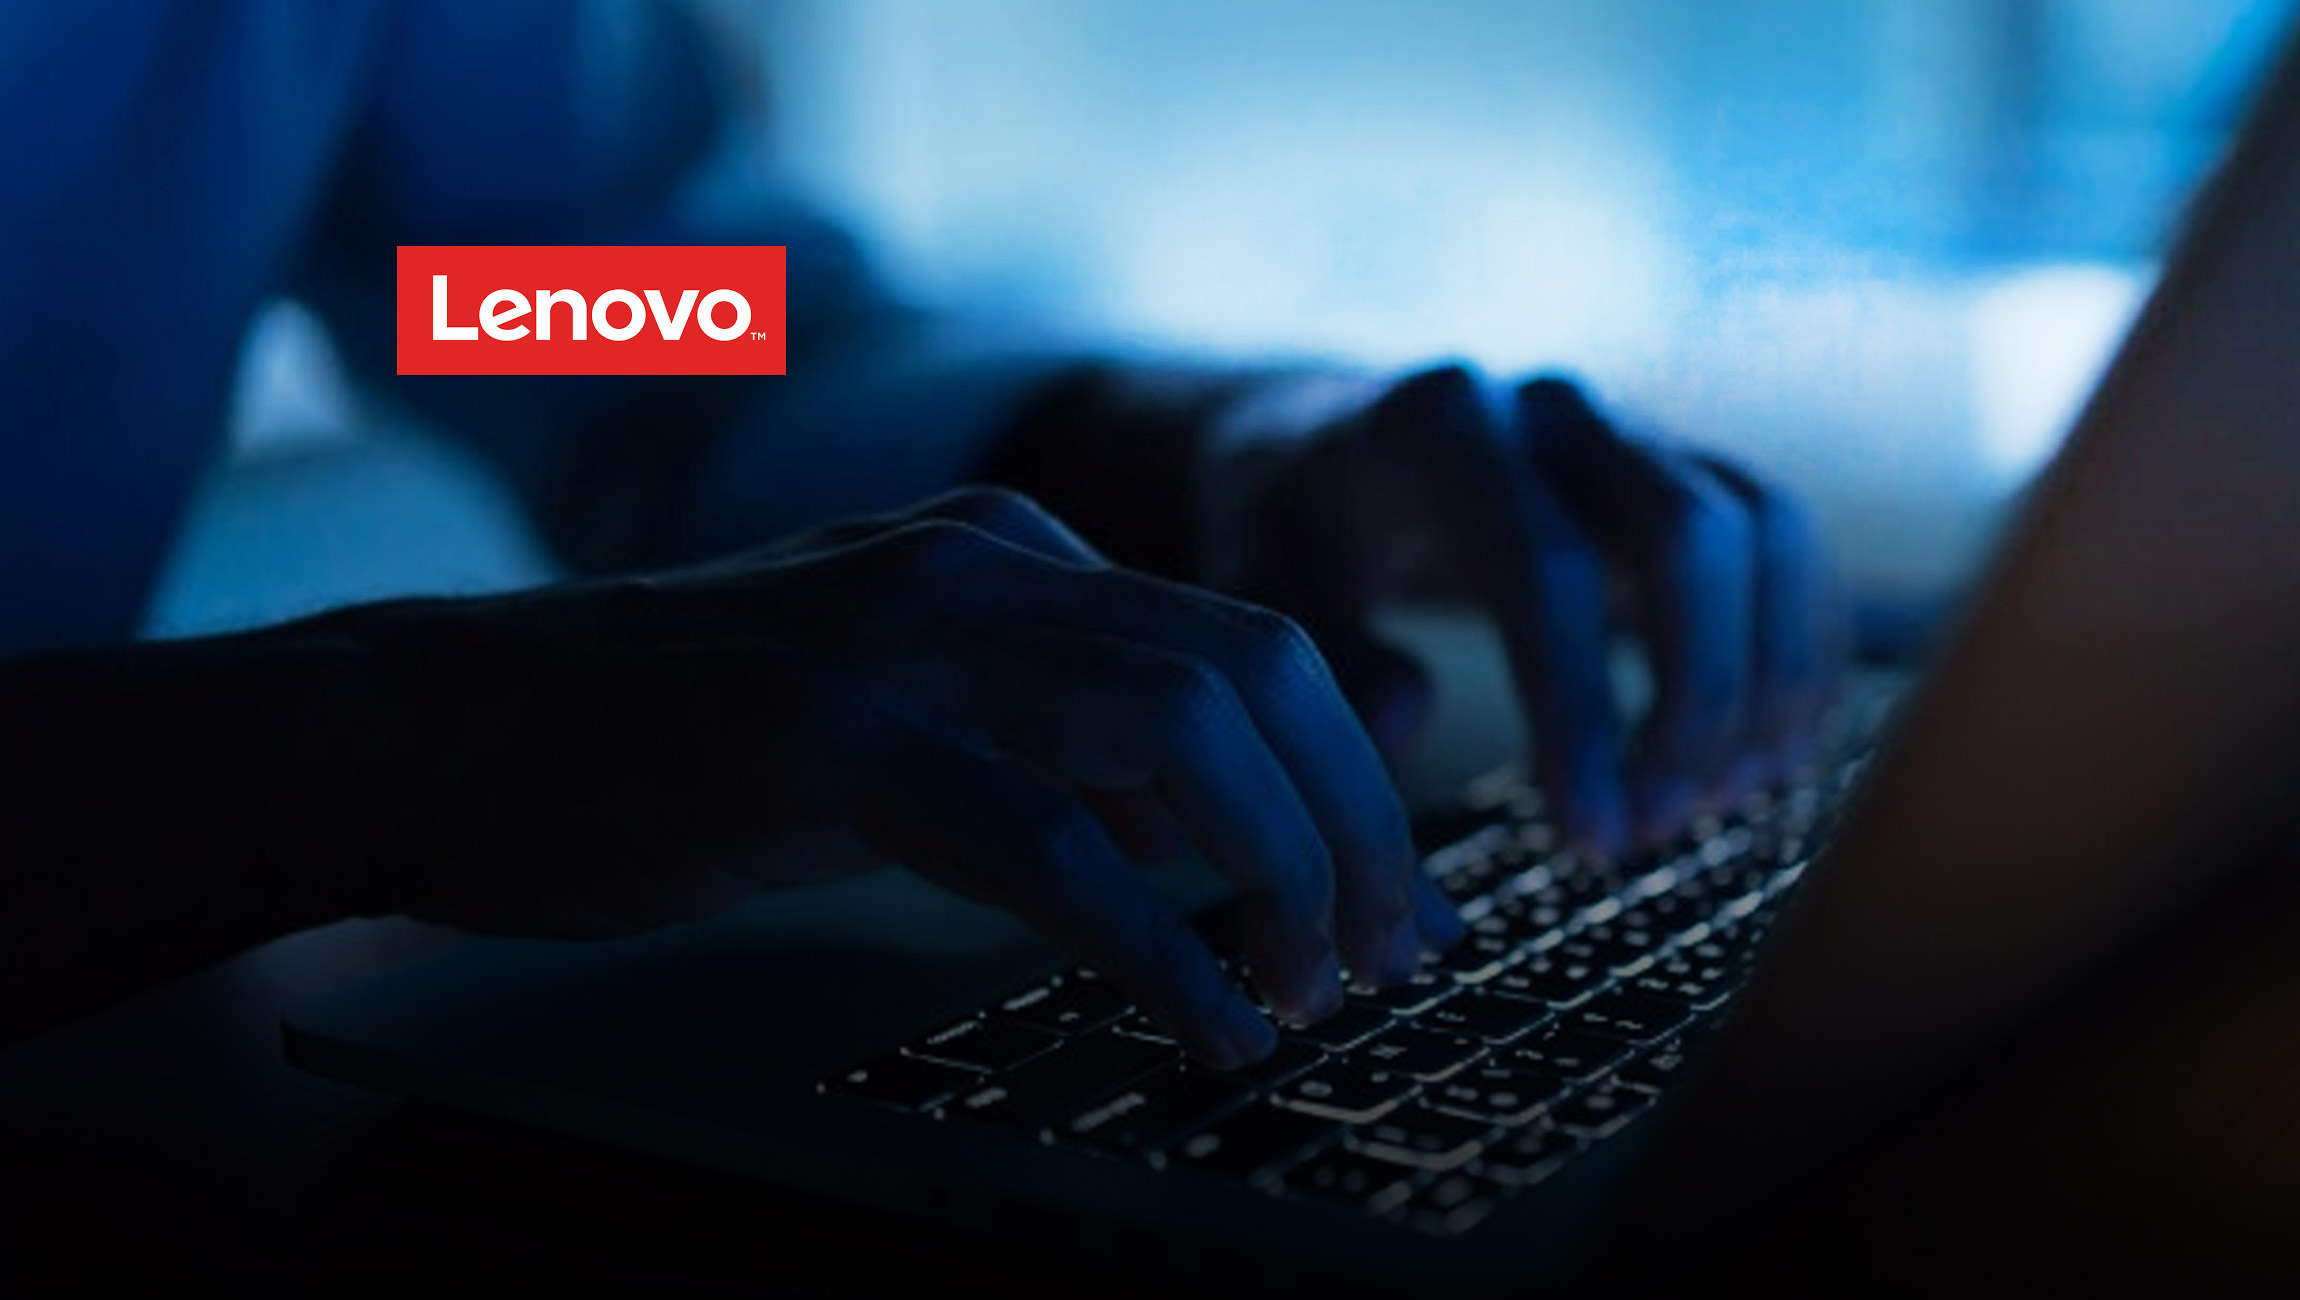 Lenovo Data Center Group Releases Cloud-Based Business Agility Solutions  for The New, Smarter Normal